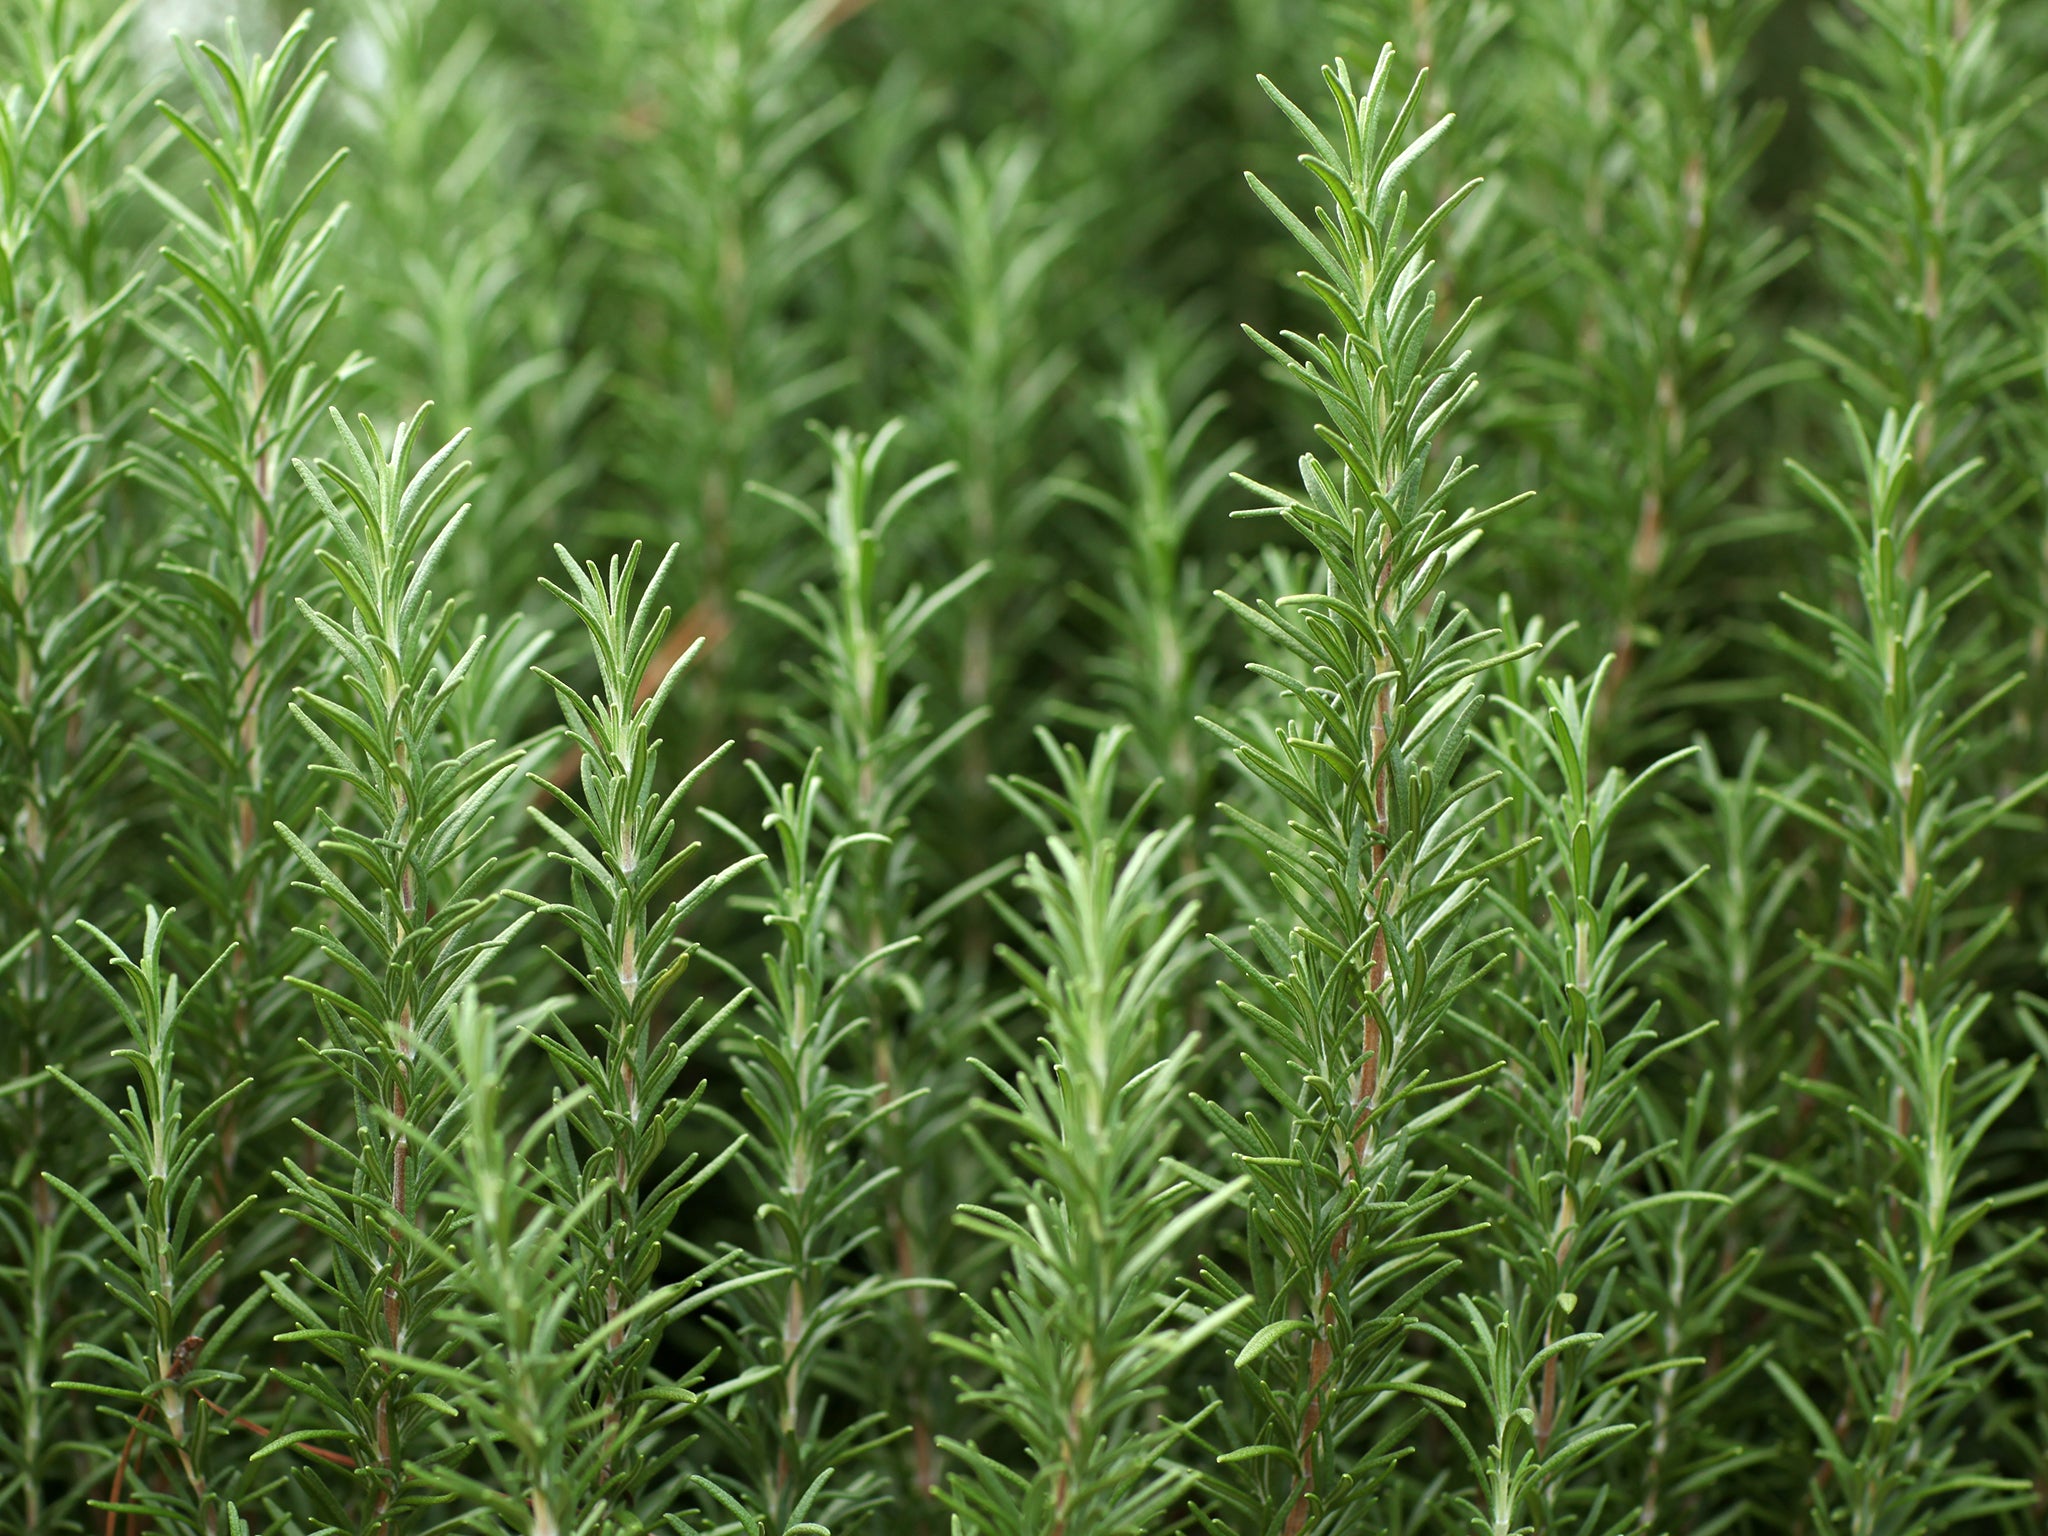 Thyme is celebrated for its aromatic qualities and sweetly earthy flavour